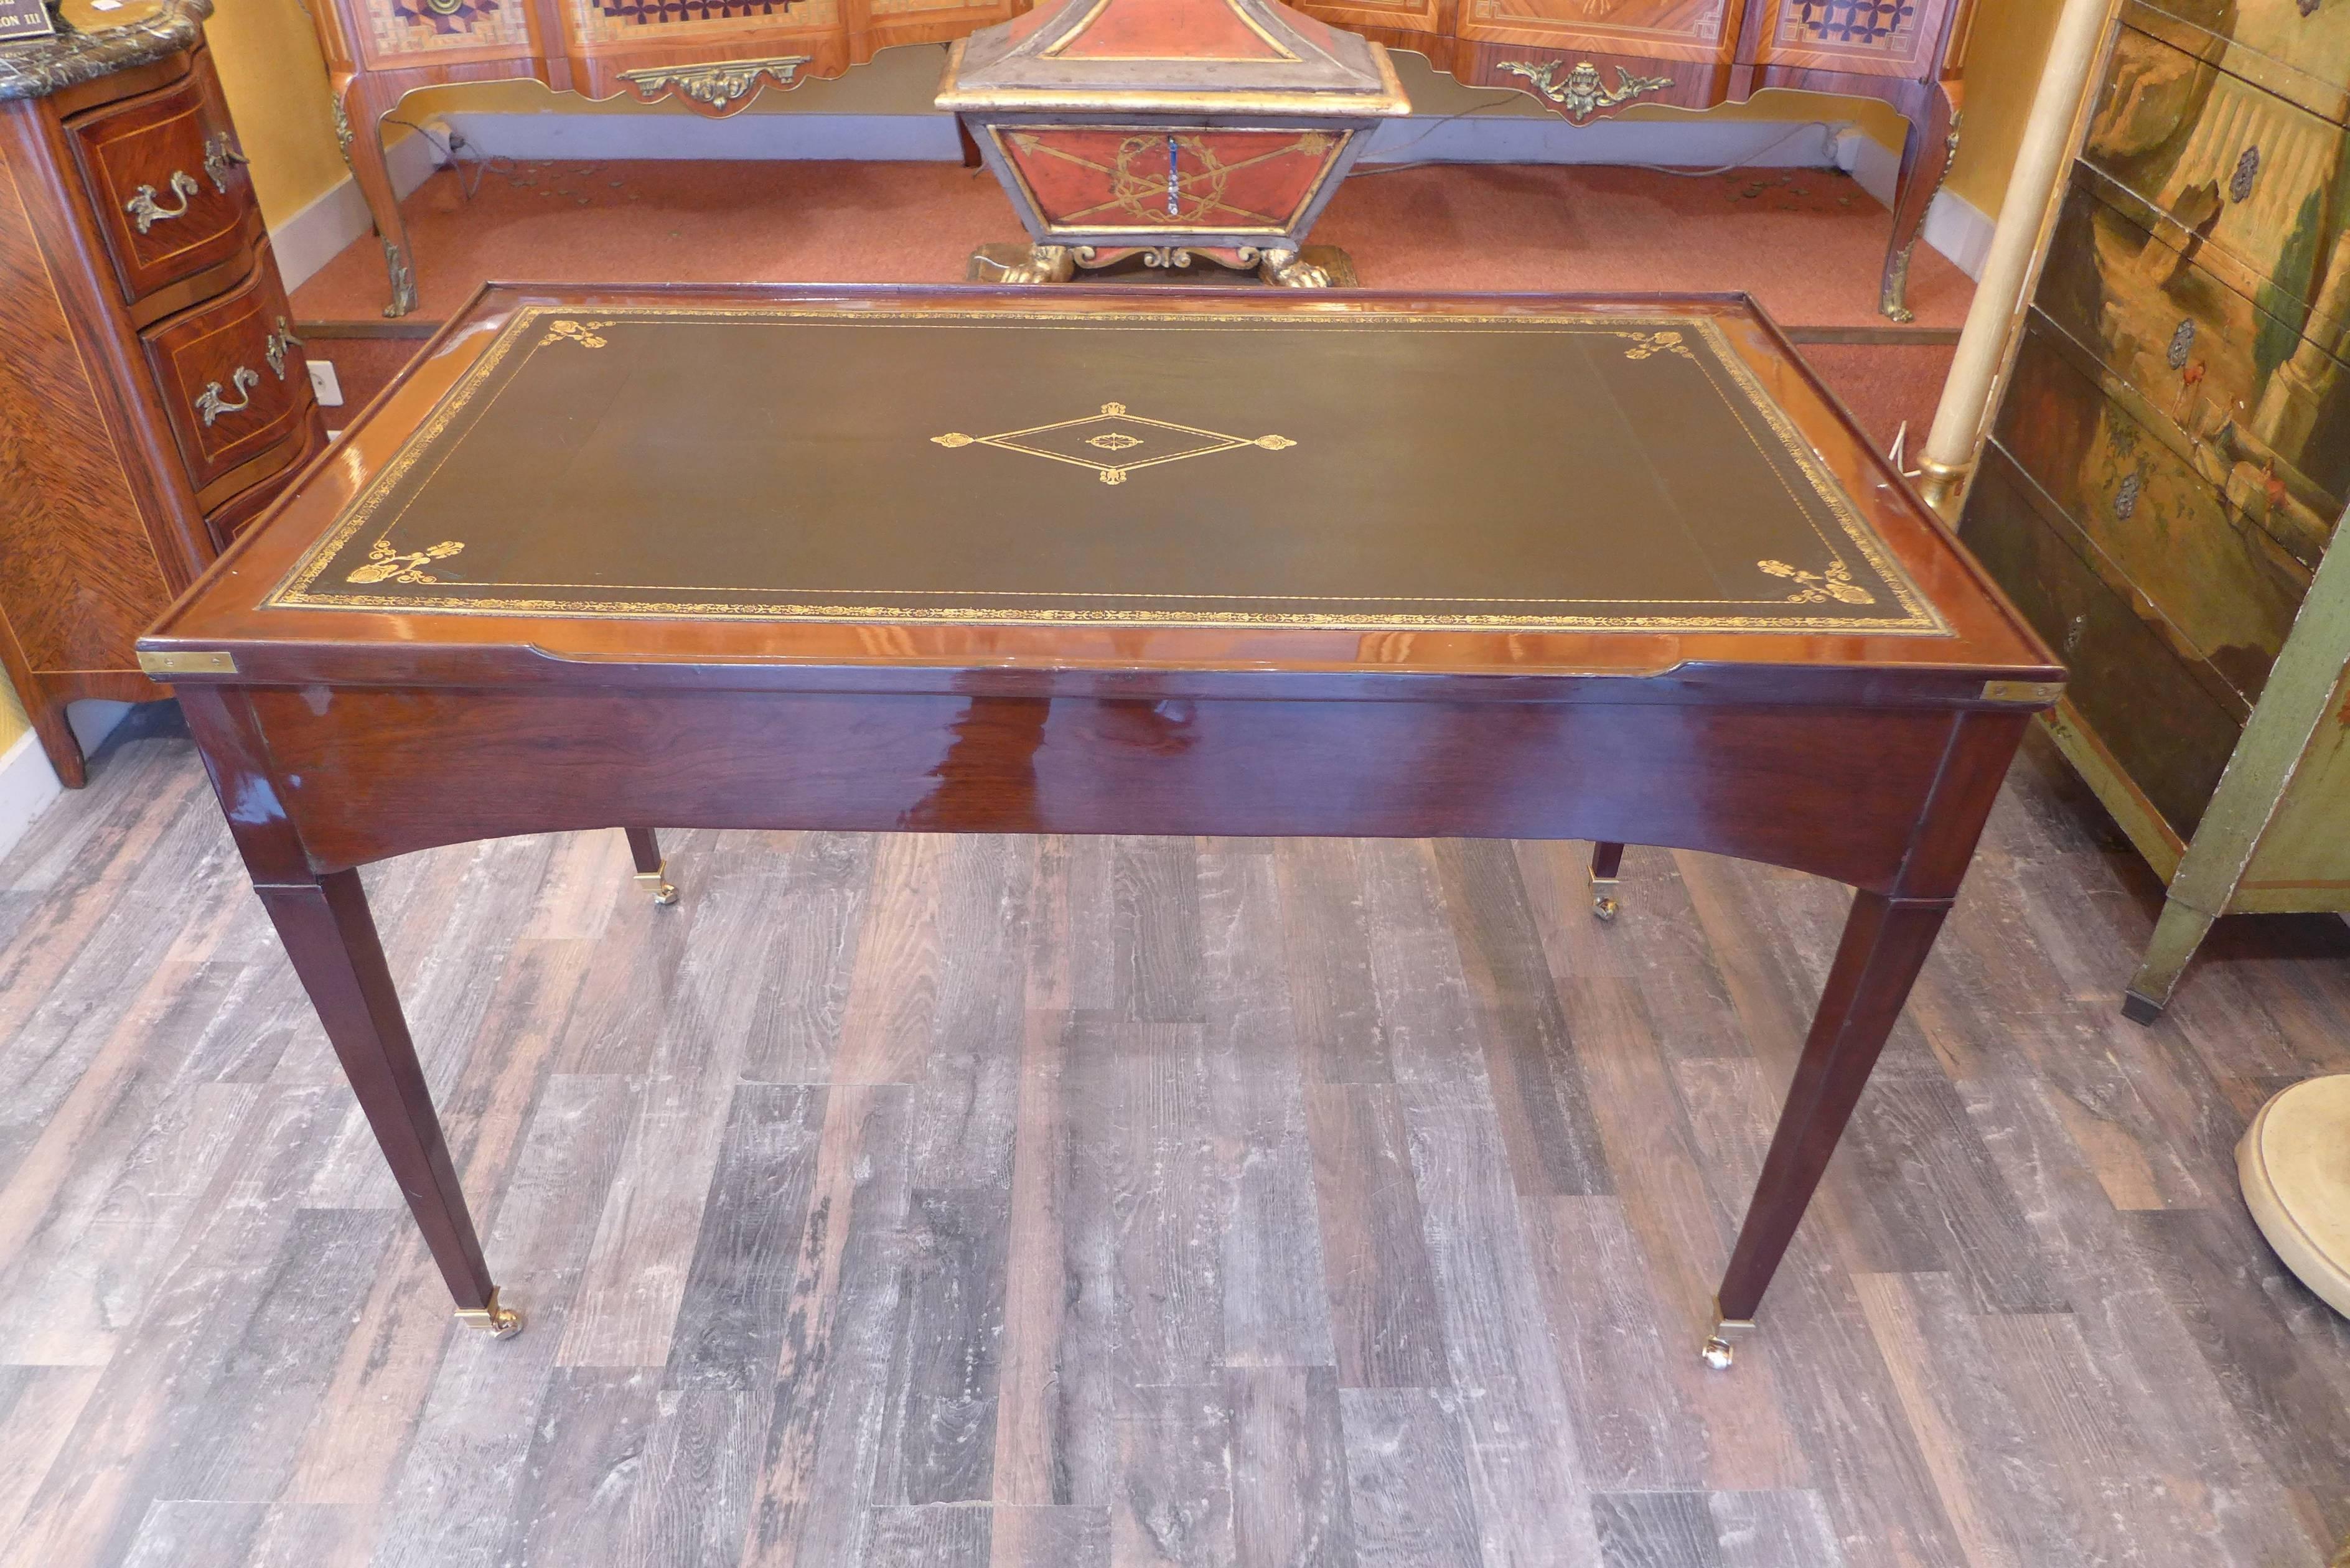 French Directoire Period, circa 1795 Reversible Desk and Tric-Trac Game Table 1